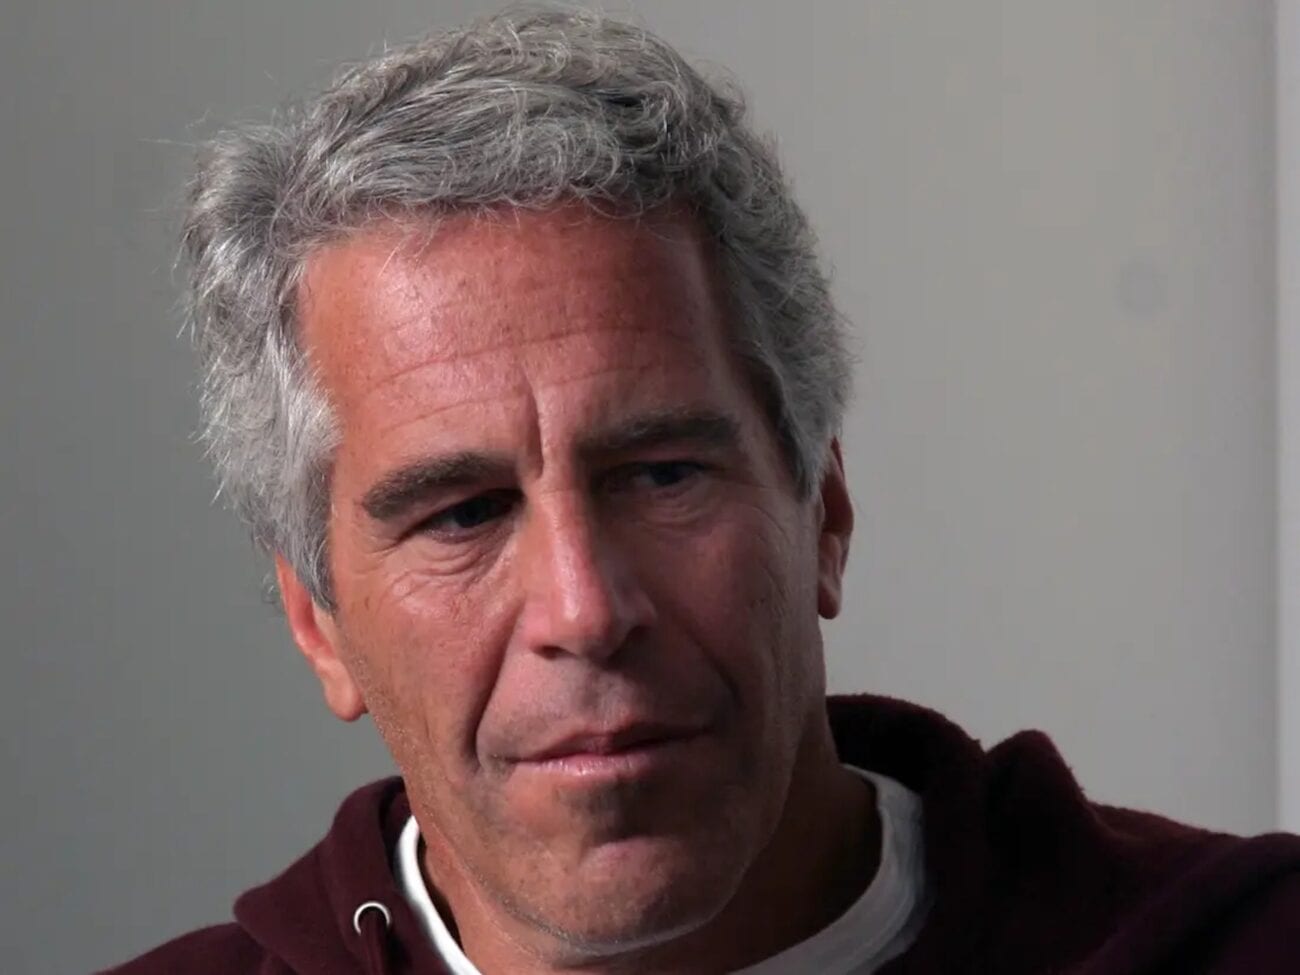 Jeffrey Epstein, sex trafficker and convicted pedophile, had lots of friends in high places. What did they get away with?